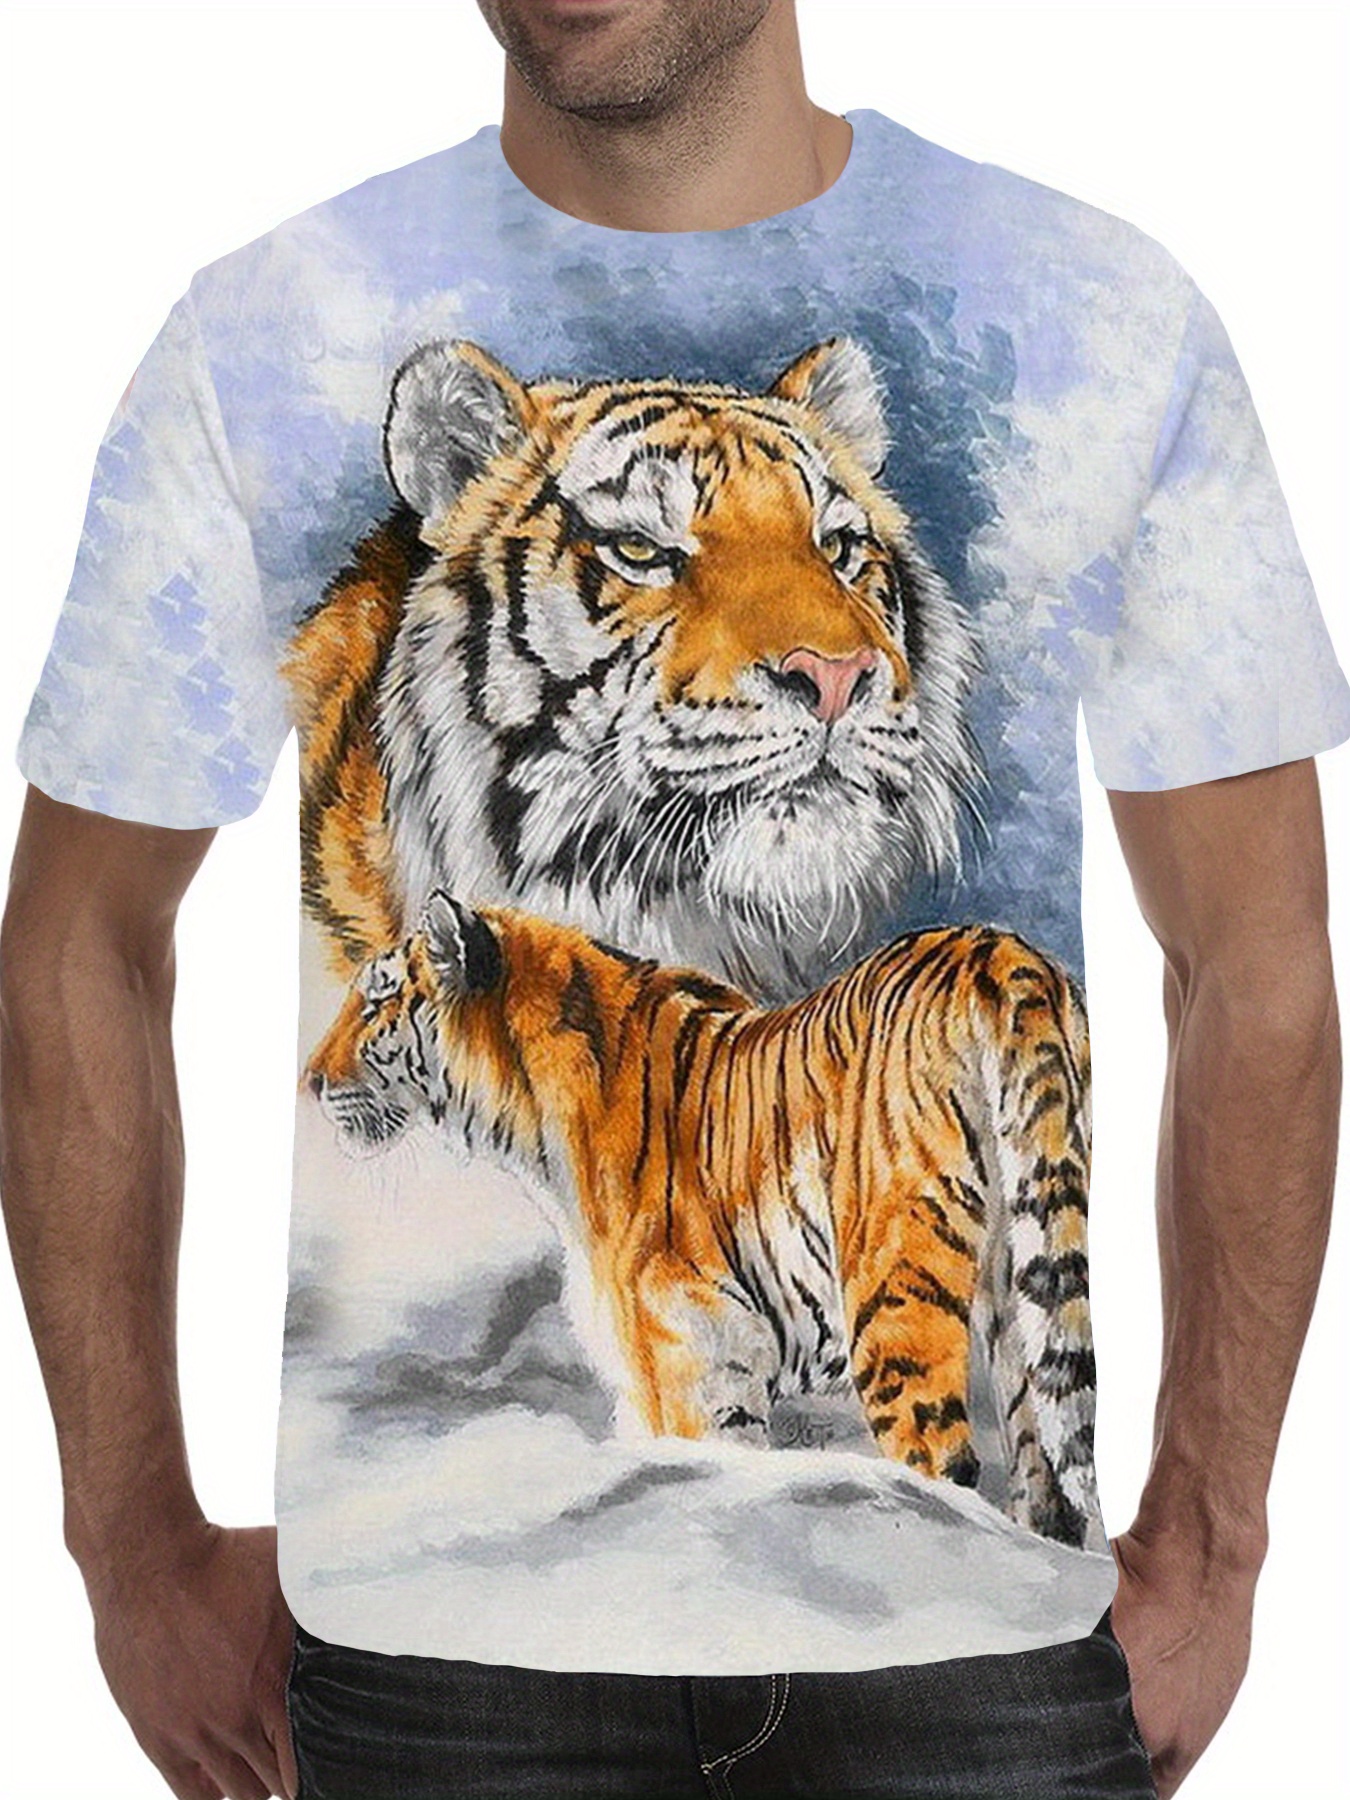 Temu 3D Tiger Print, Men's Graphic Design Crew Neck Novel T-Shirt, Casual Comfy Tees Tshirts for Summer, Men's Clothing Tops for Daily Vacation Resorts